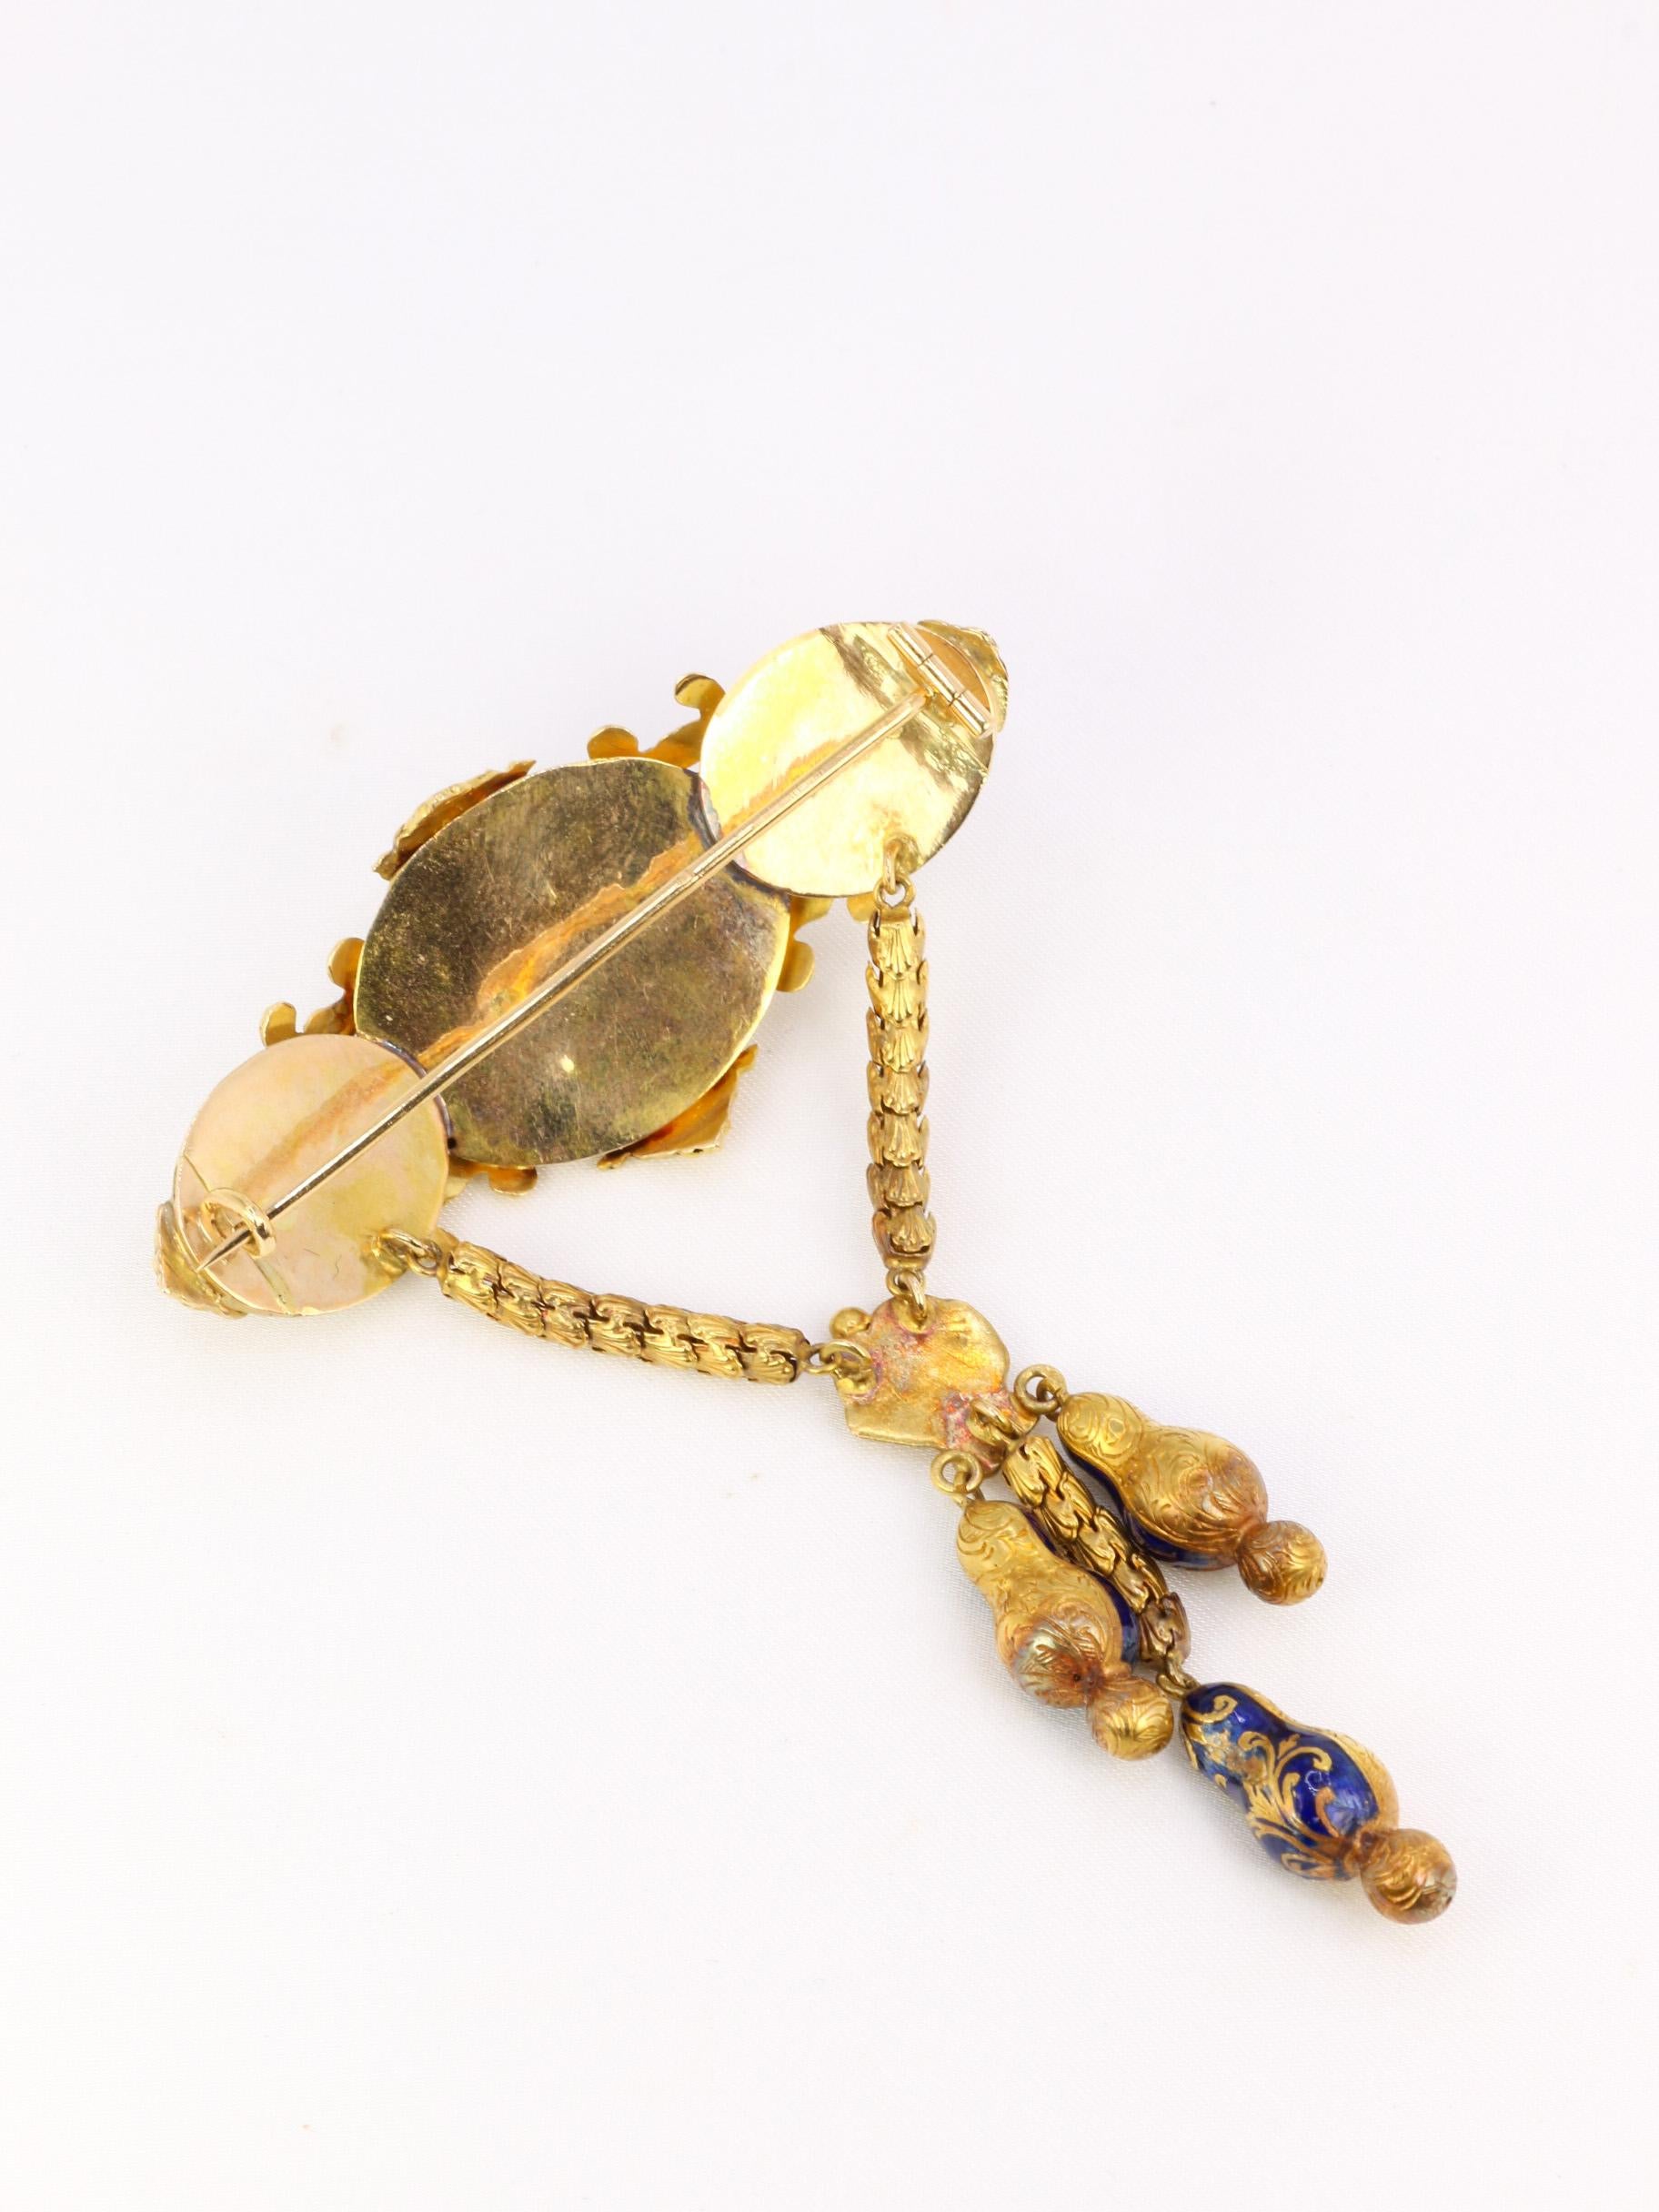 Round Cut Antique victorian yellow gold and blue enamel brooch set with pearls For Sale